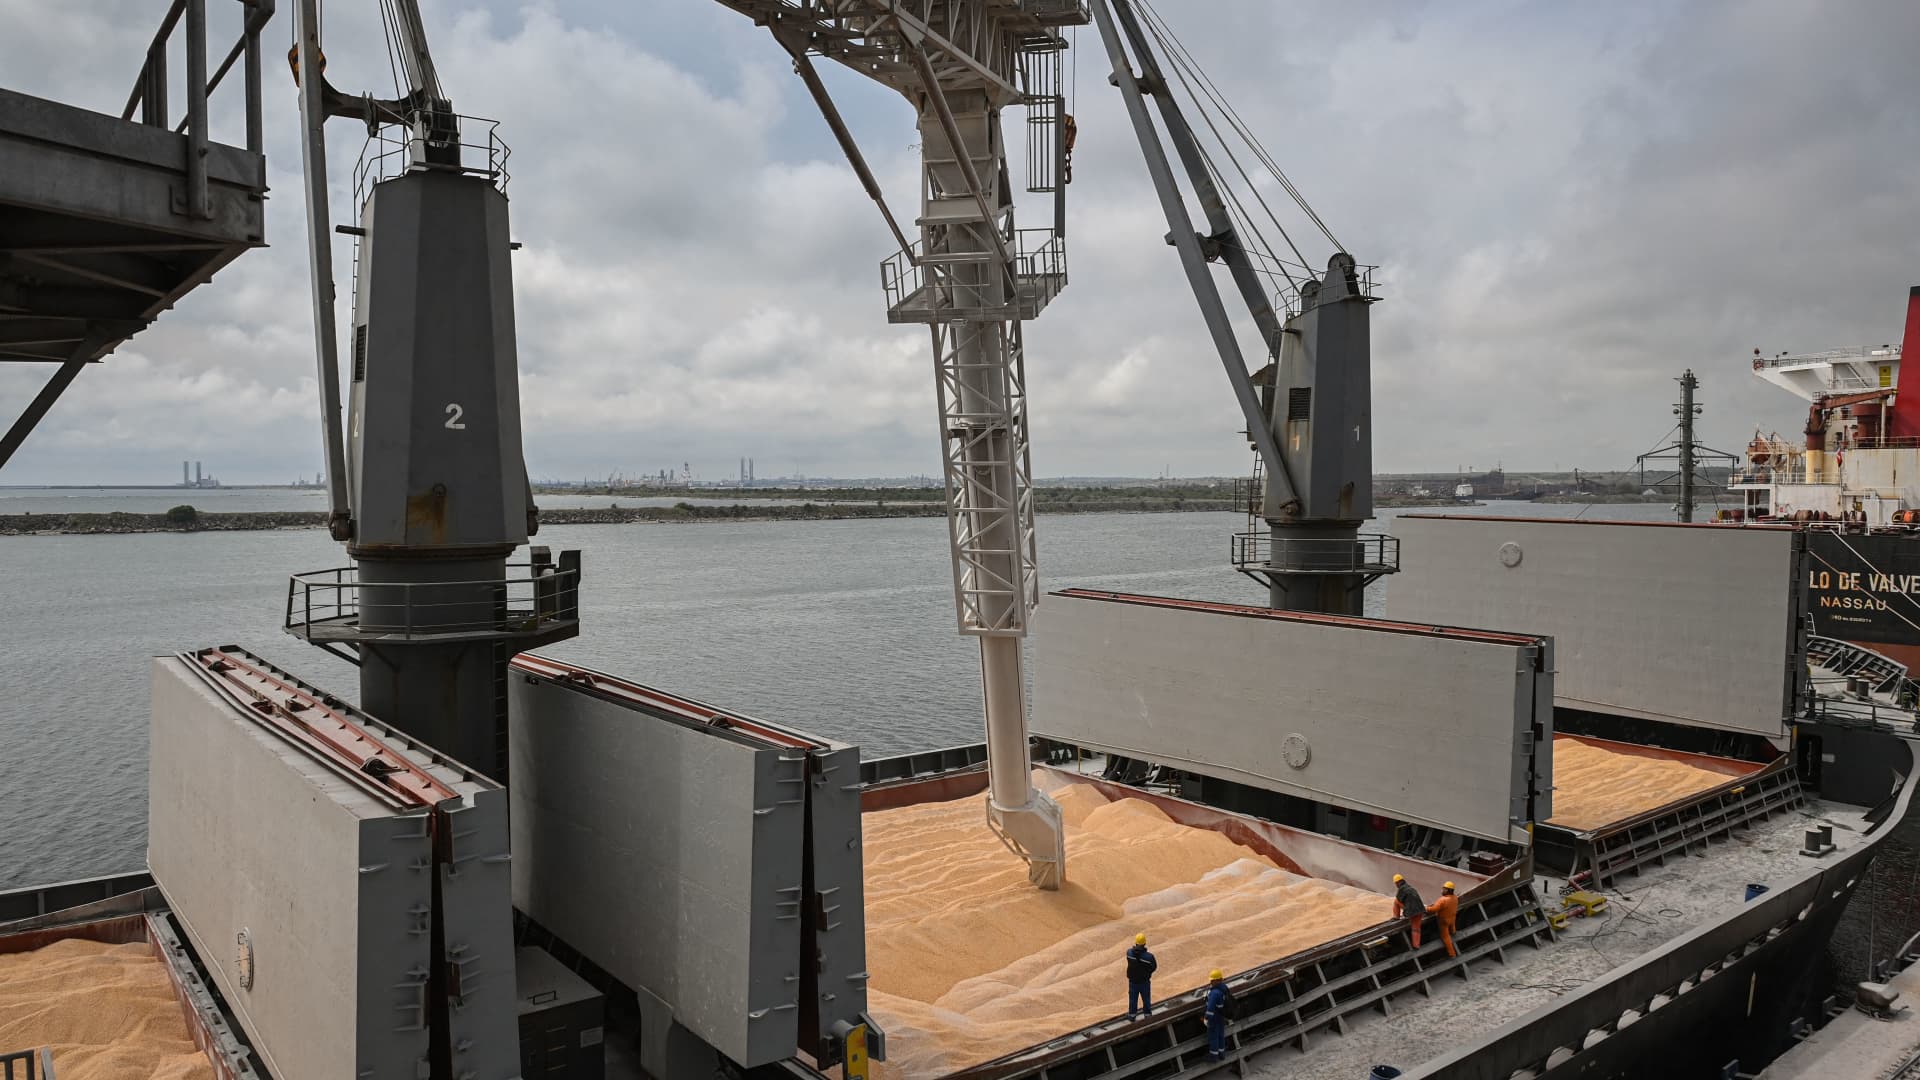 Workers assist the loading of corn on to a ship at Pier 80 in the Black Sea port of Constanta, Romania on May 3, 2022. The Romanian port seeks to become an export hub for neighboring Ukraine after Russia's invasion cut off its sea routes.